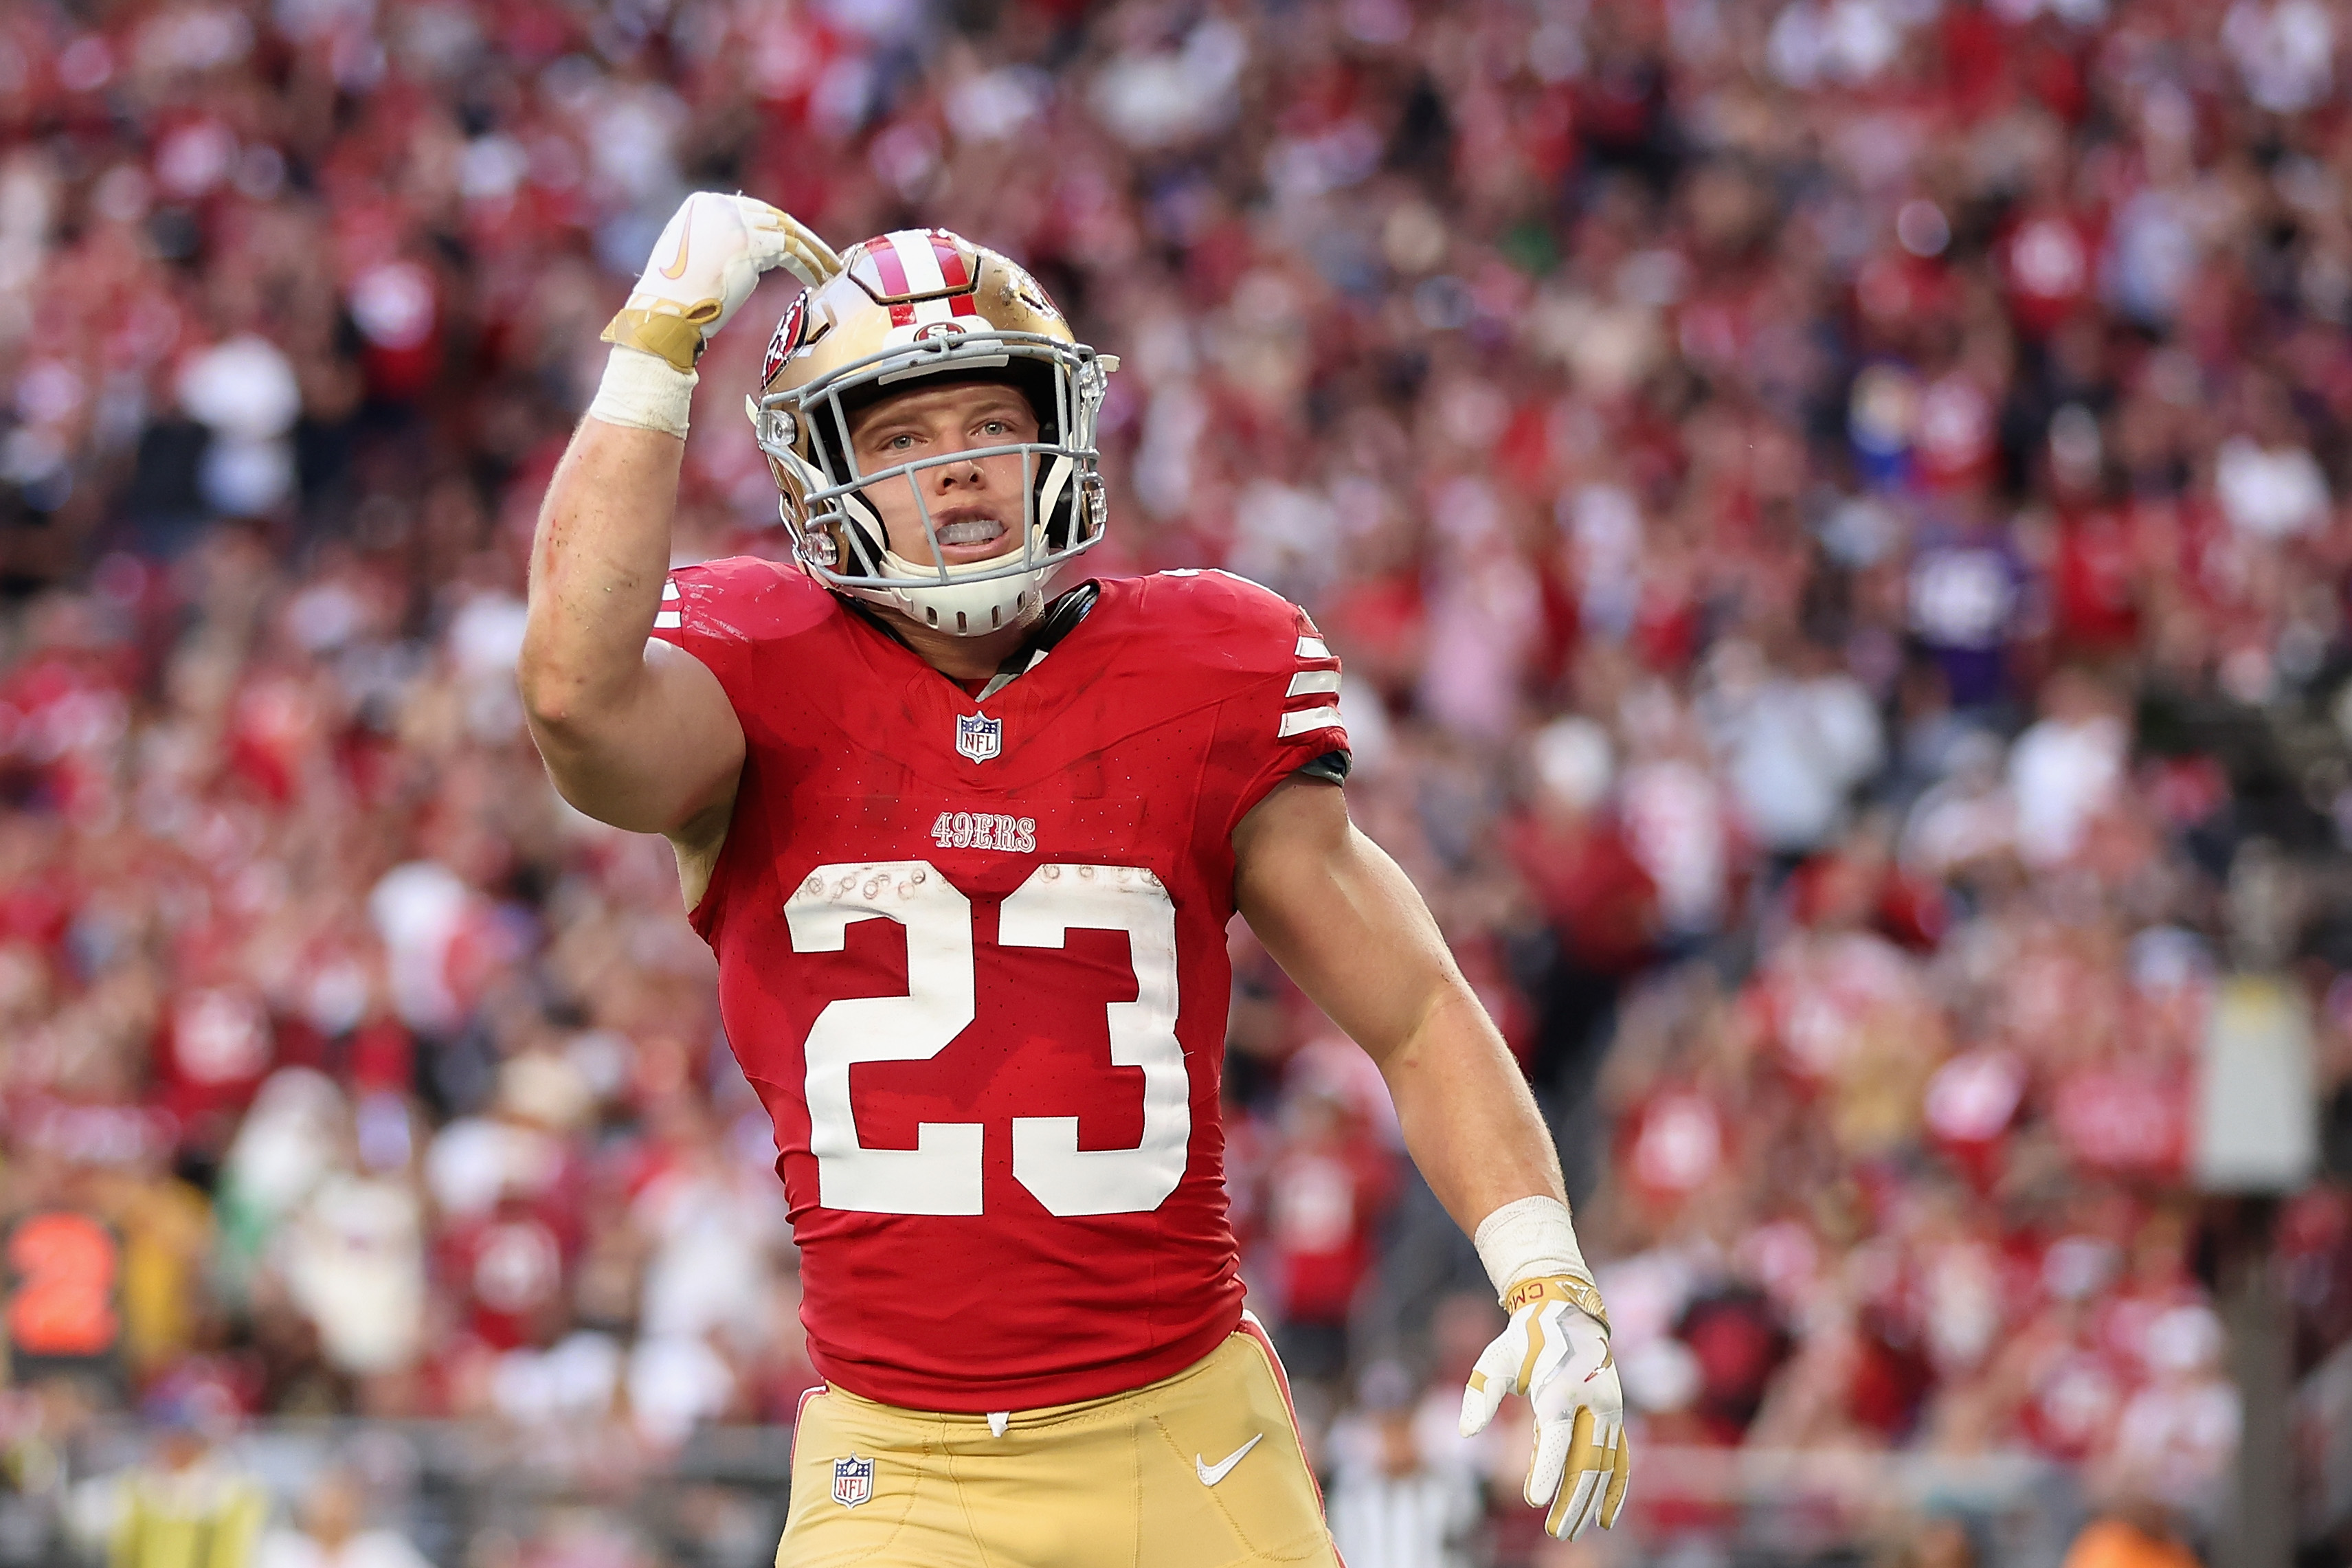 Running back Christian McCaffrey #23 of the San Francisco 49ers celebrates after scoring a 5-yard rushing touchdown against the Arizona Cardinals during the second quarter of the NFL game at State Farm Stadium on December 17, 2023 in Glendale, Arizona. The 49ers defeated the Cardinals 45-29.